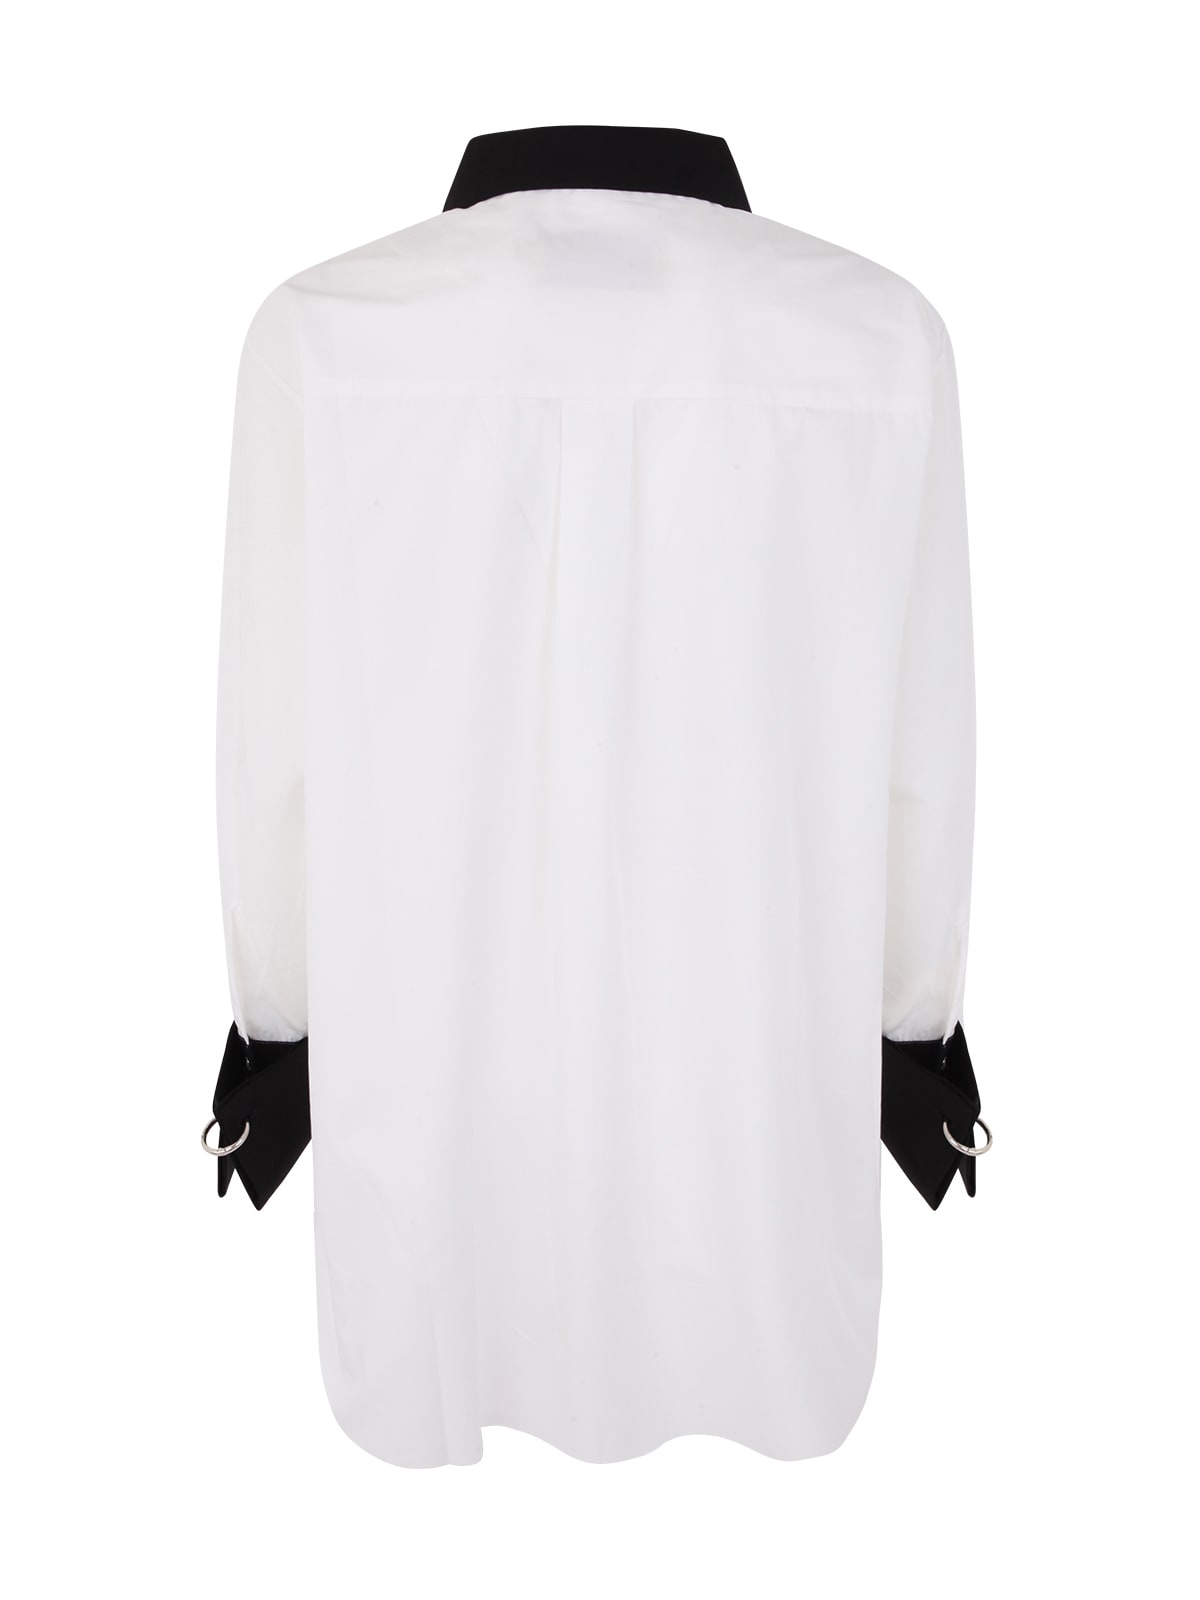 Shop Marques' Almeida Shirt With Detachable Cuffs And Collar In Black/white